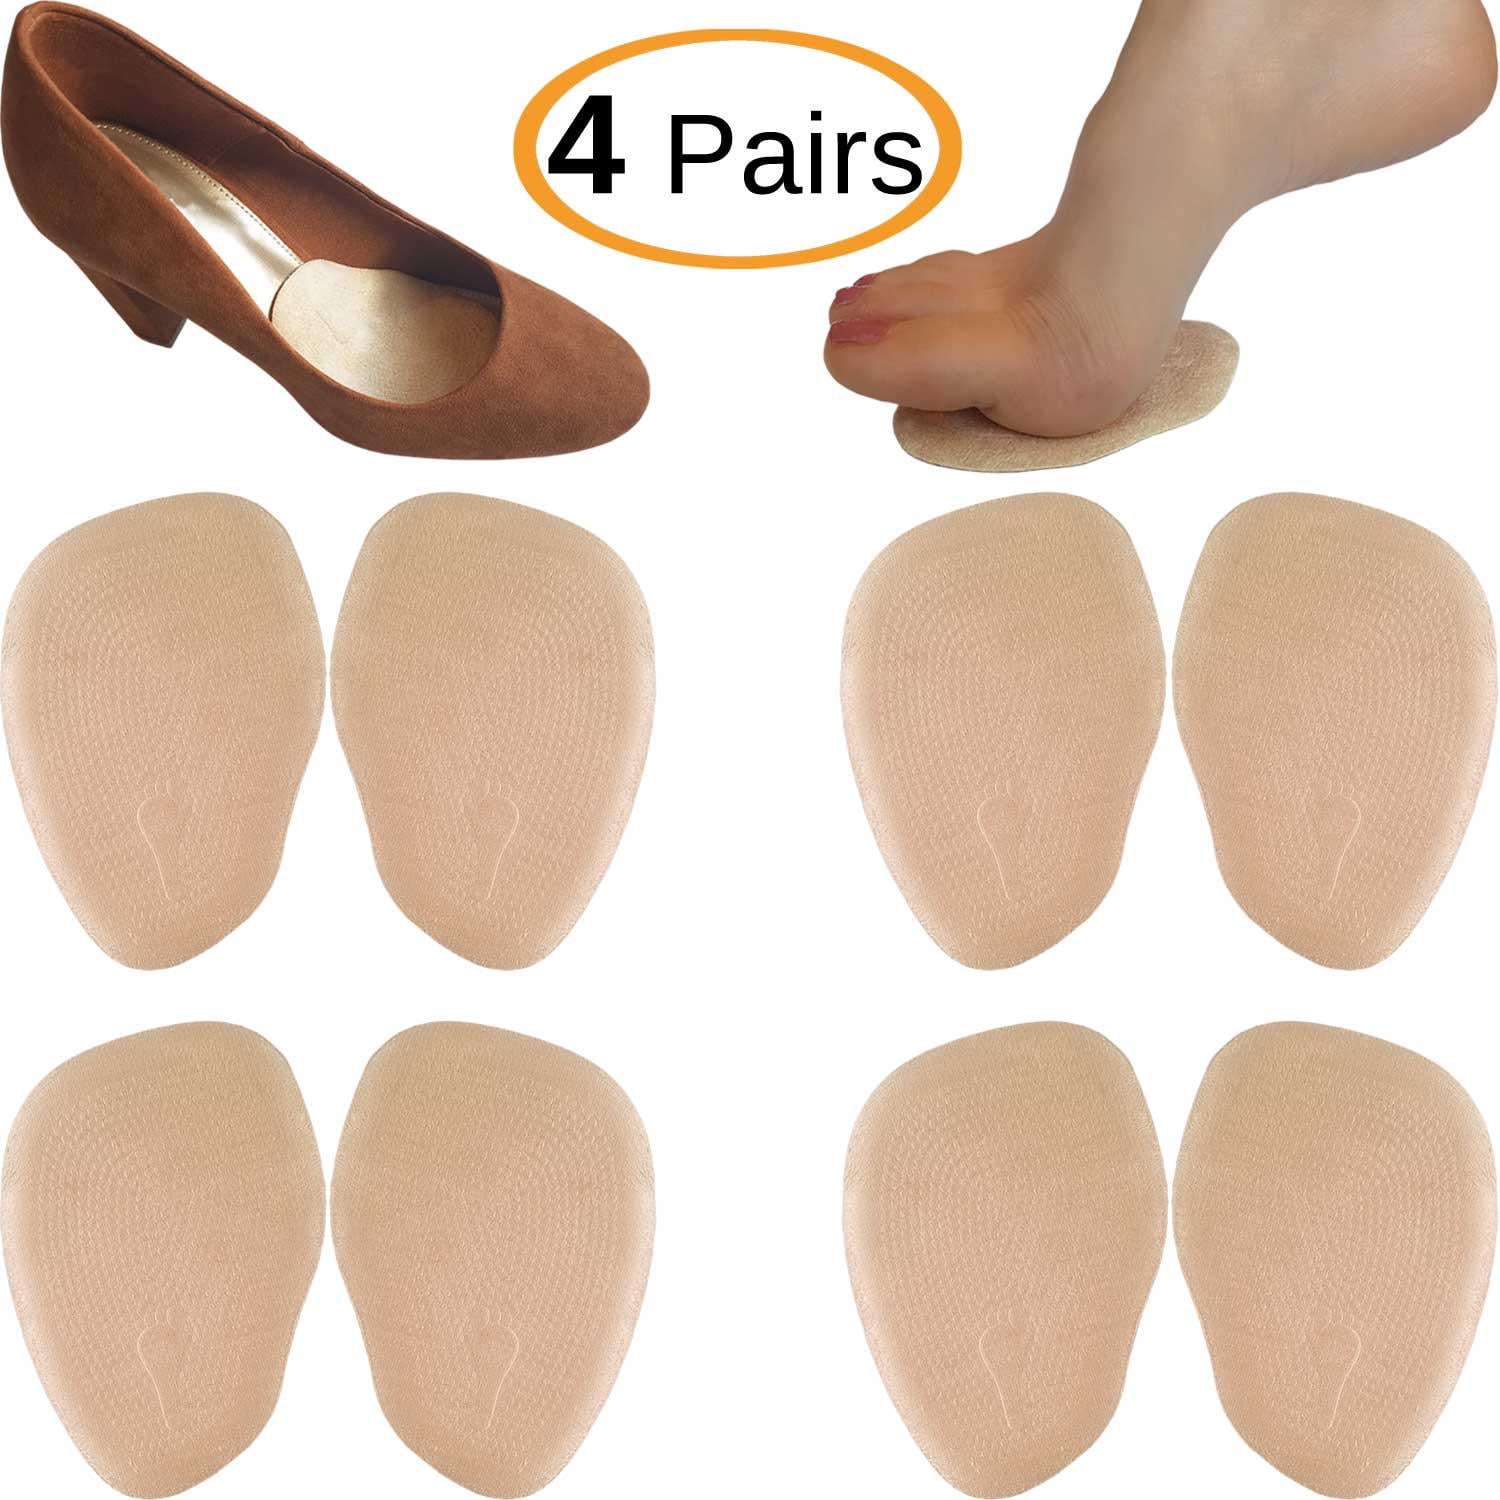 Chiroplax High Heel Cushion Inserts Pads 4 Pairs Suede Ball of Foot Forefoot Metatarsal Anti Slip Shoe Insoles for Women Beige Normal Thickness f3ff1dd1 c946 4adf a63b 61fdc2784e2b 1.054de86b62553d0022e120a3ea1b3b4d